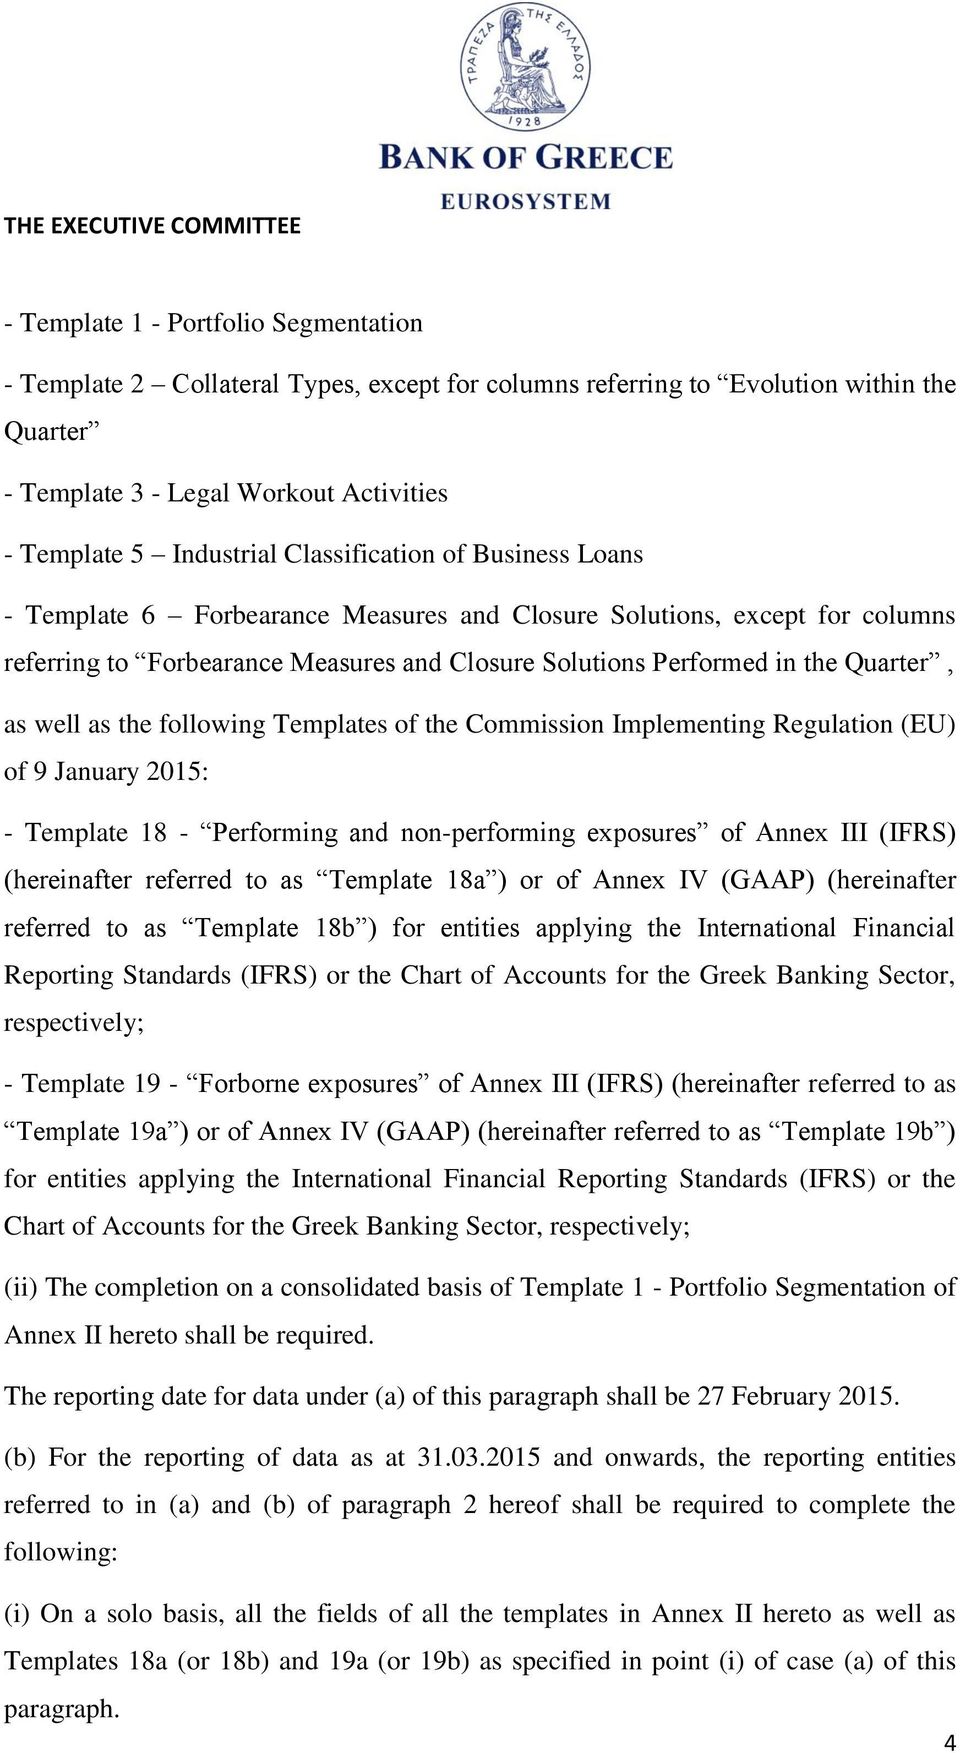 as the following Templates of the Commission Implementing Regulation (EU) of 9 January 2015: - Template 18 - Performing and non-performing exposures of Annex III (IFRS) (hereinafter referred to as